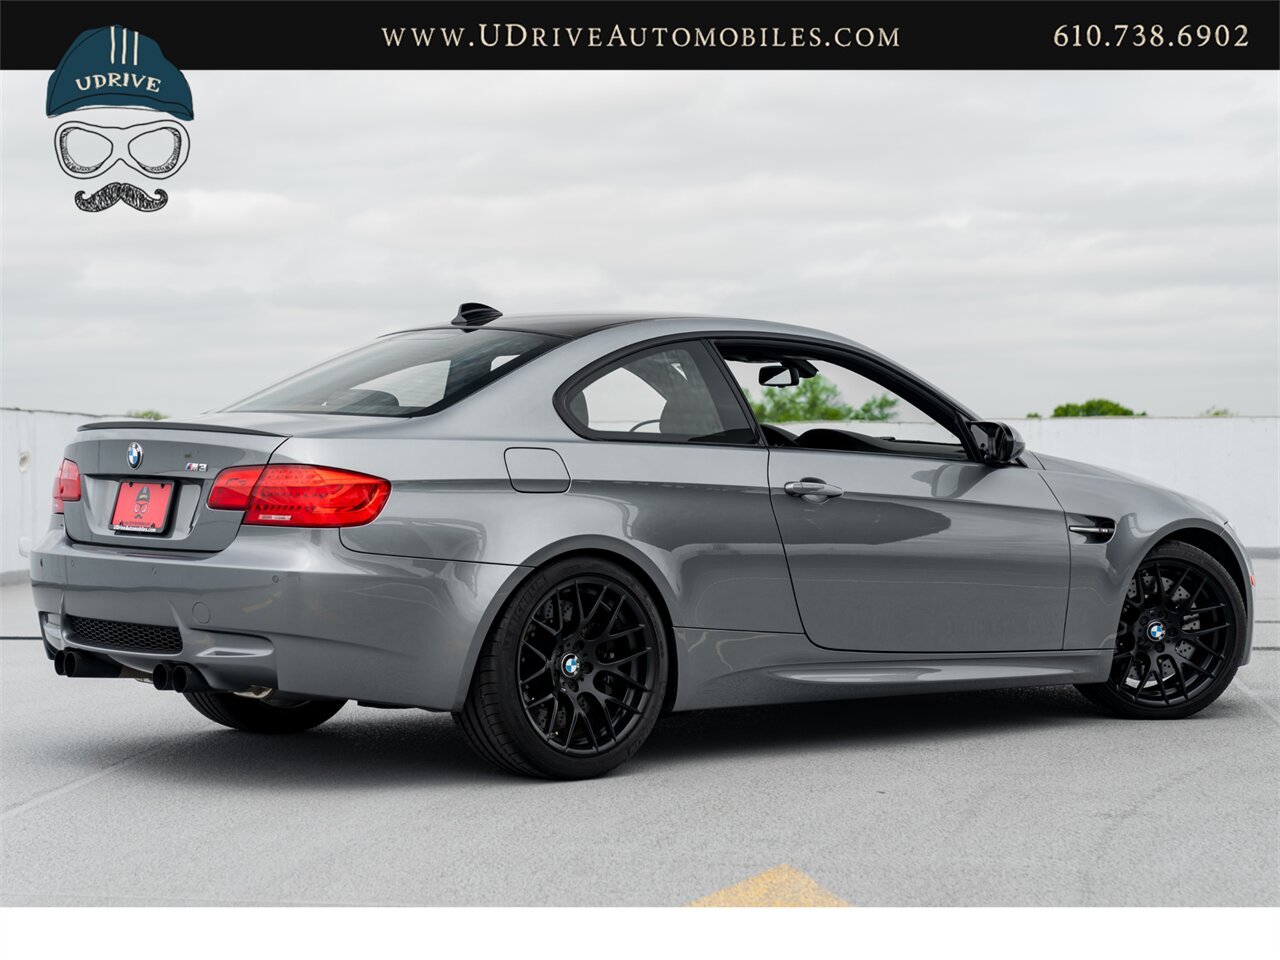 2012 BMW M3 E92 6 Speed 7k Miles Dinan Upgrades  GTS/359 Wheels Carbon Fiber Roof - Photo 2 - West Chester, PA 19382